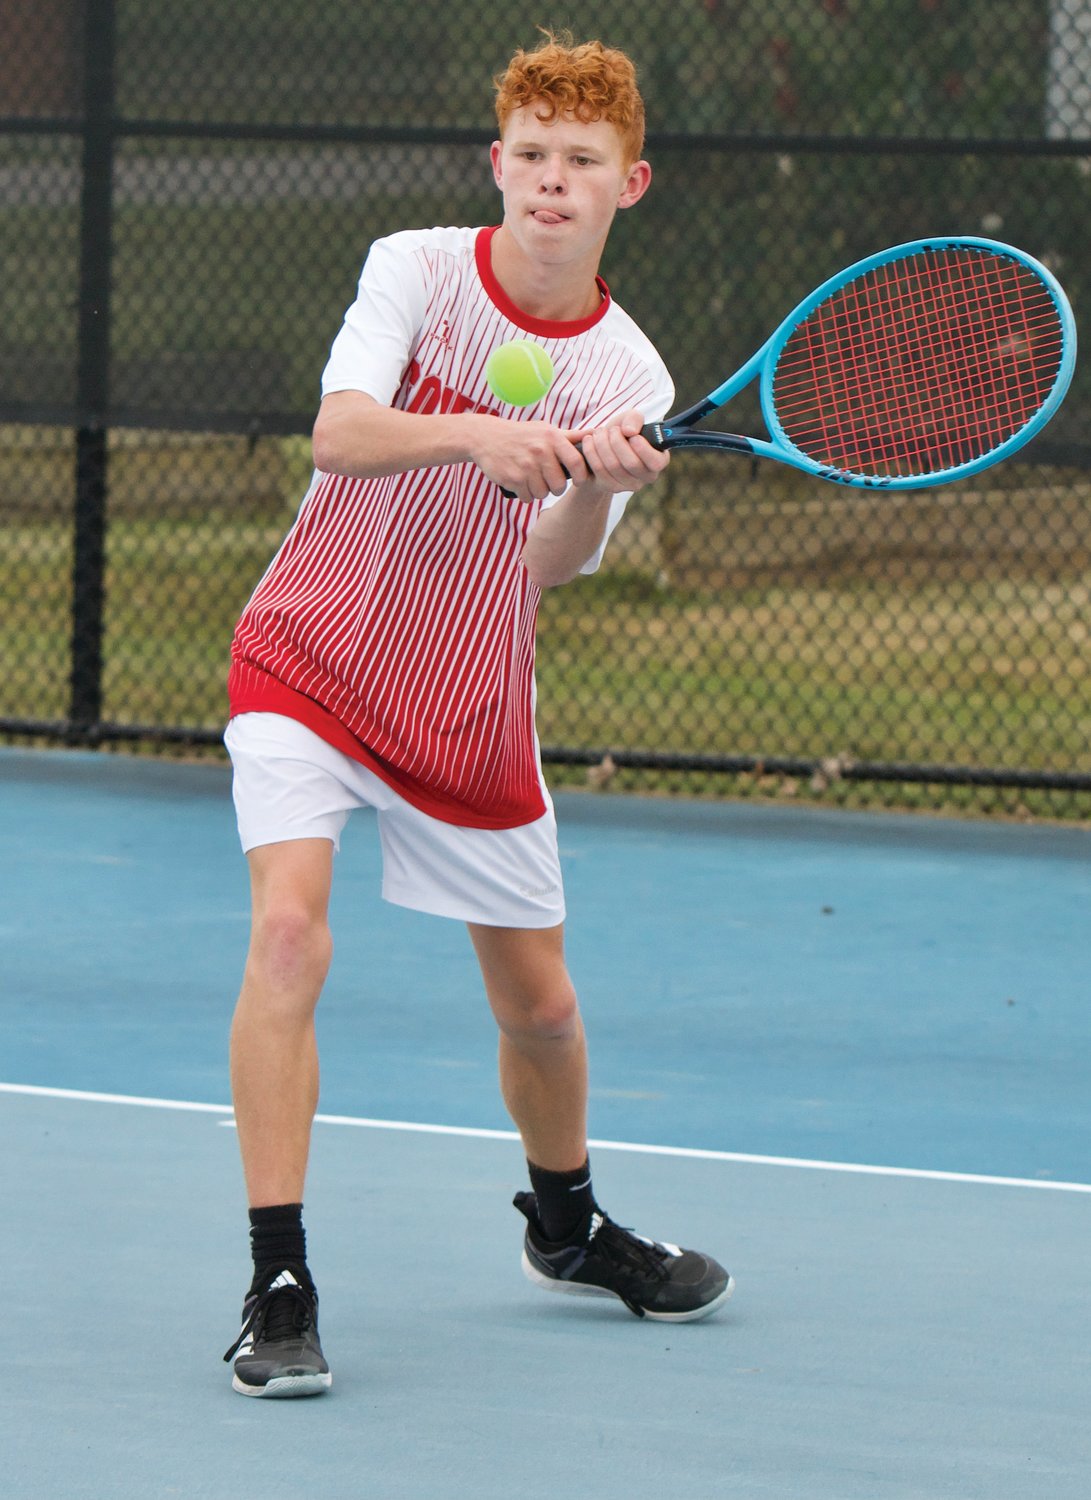 Southmont sophomore Hayden Hess helped the Mounties to a 5-0 sweep of Crawfordsville on Thursday with a win at No. 3 singles.